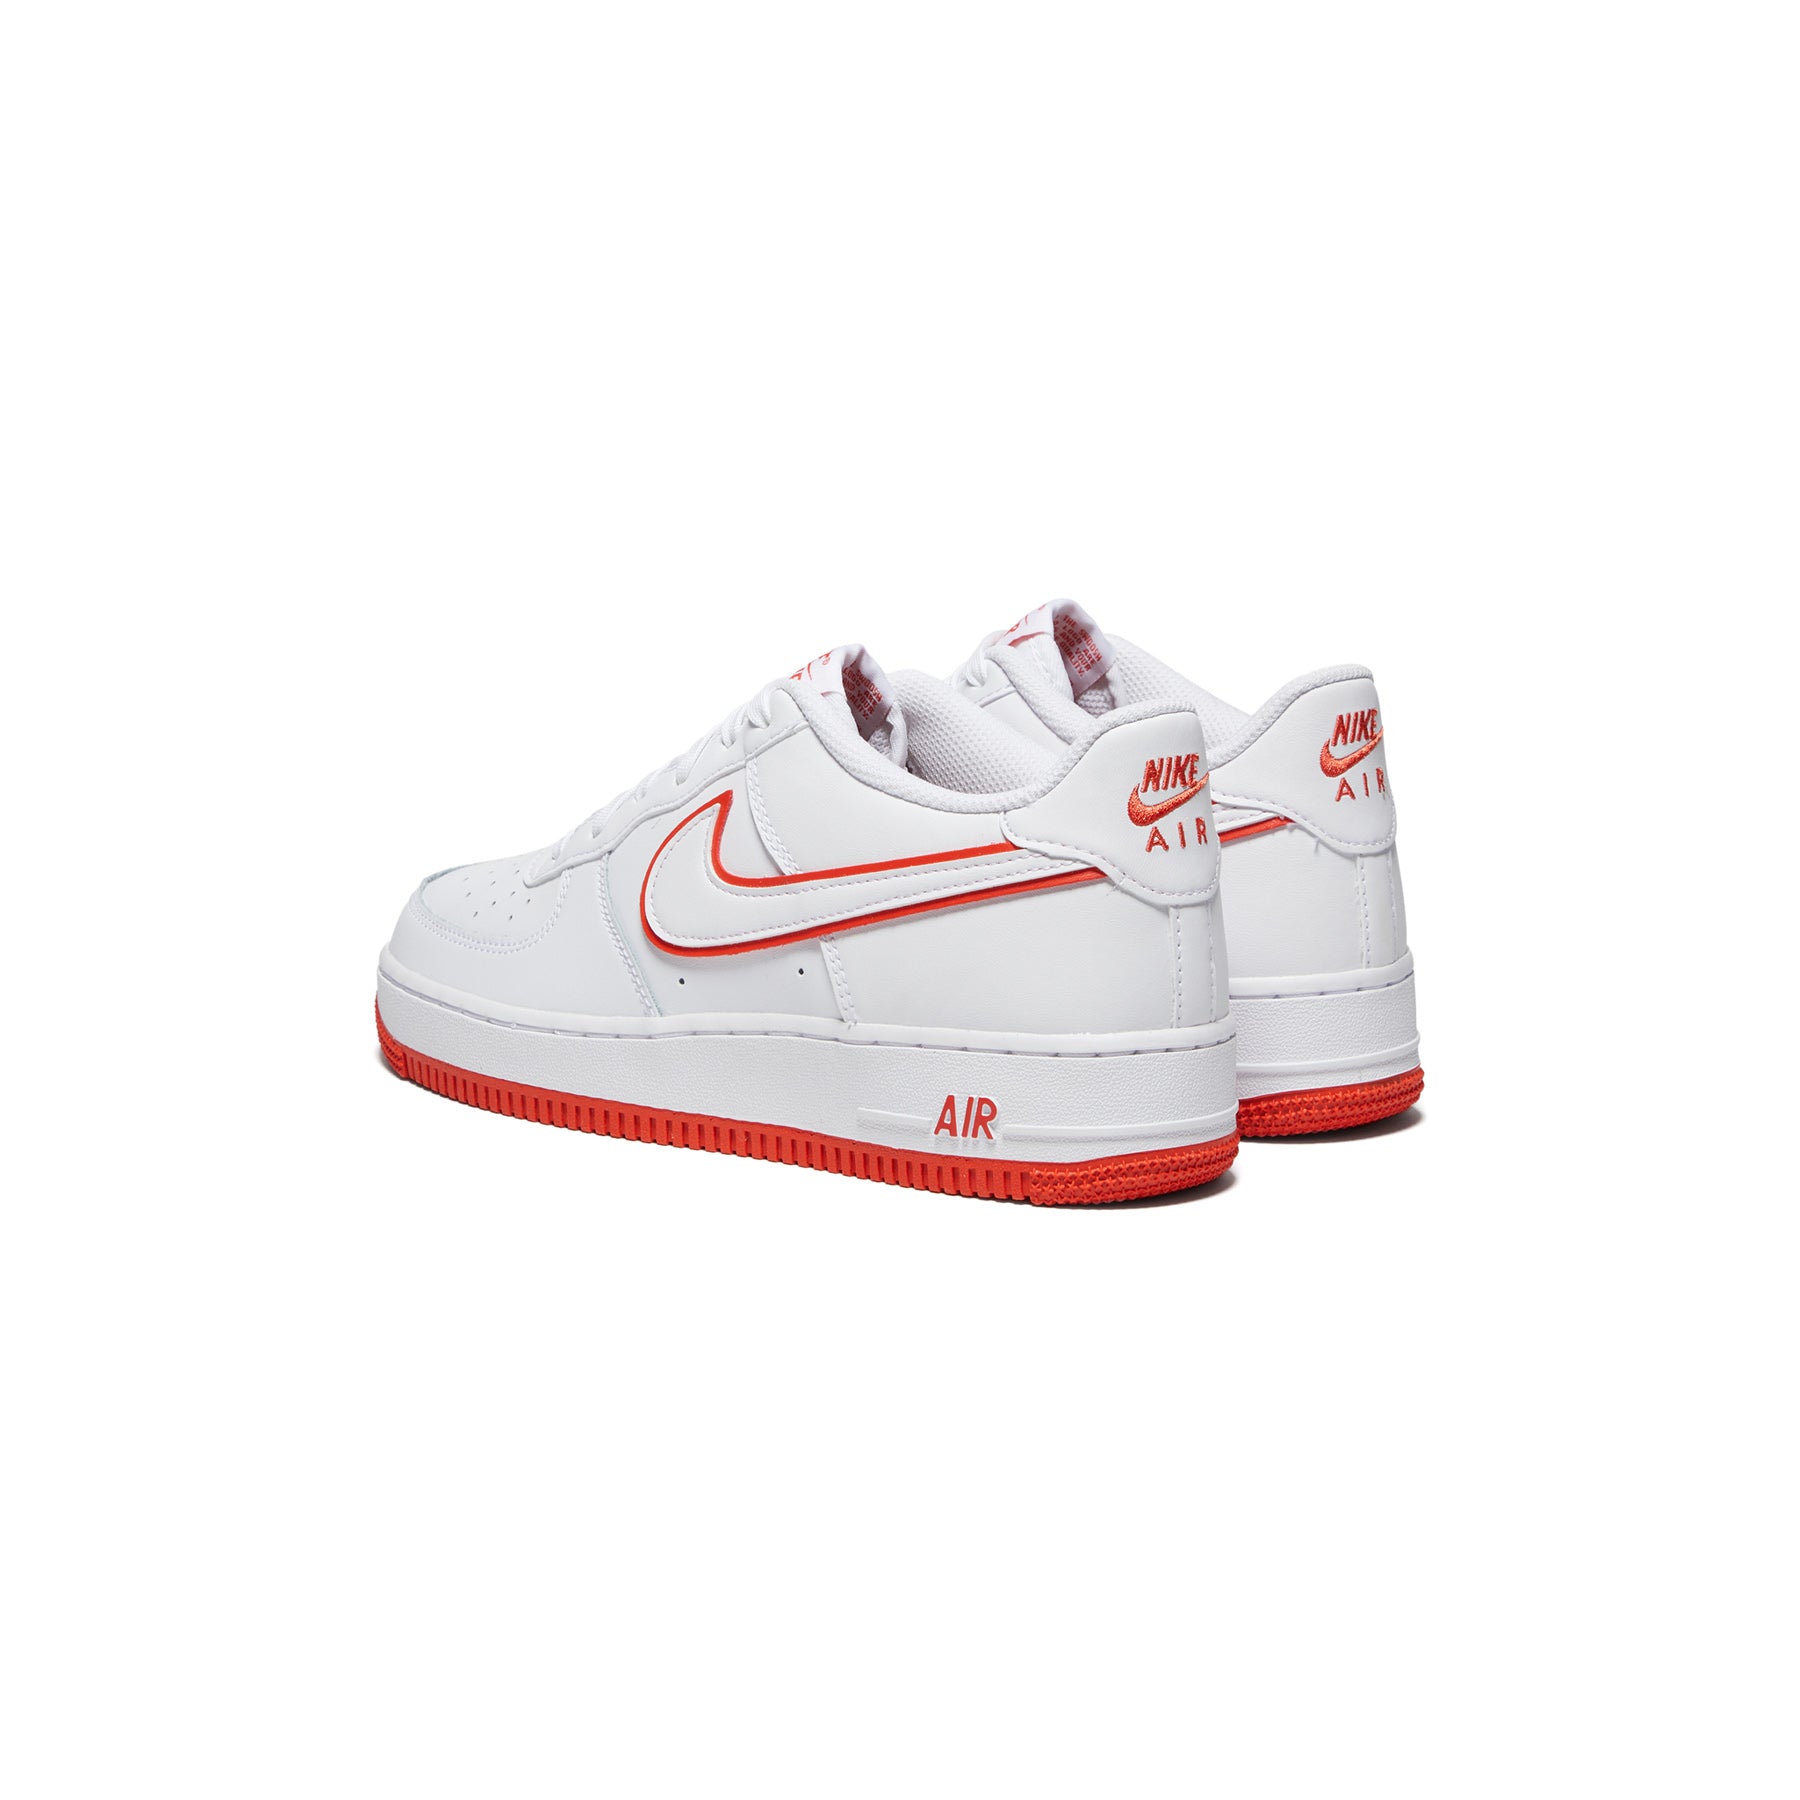 Nike Air Force 1 '07 'Picante Red' | Men's Size 10